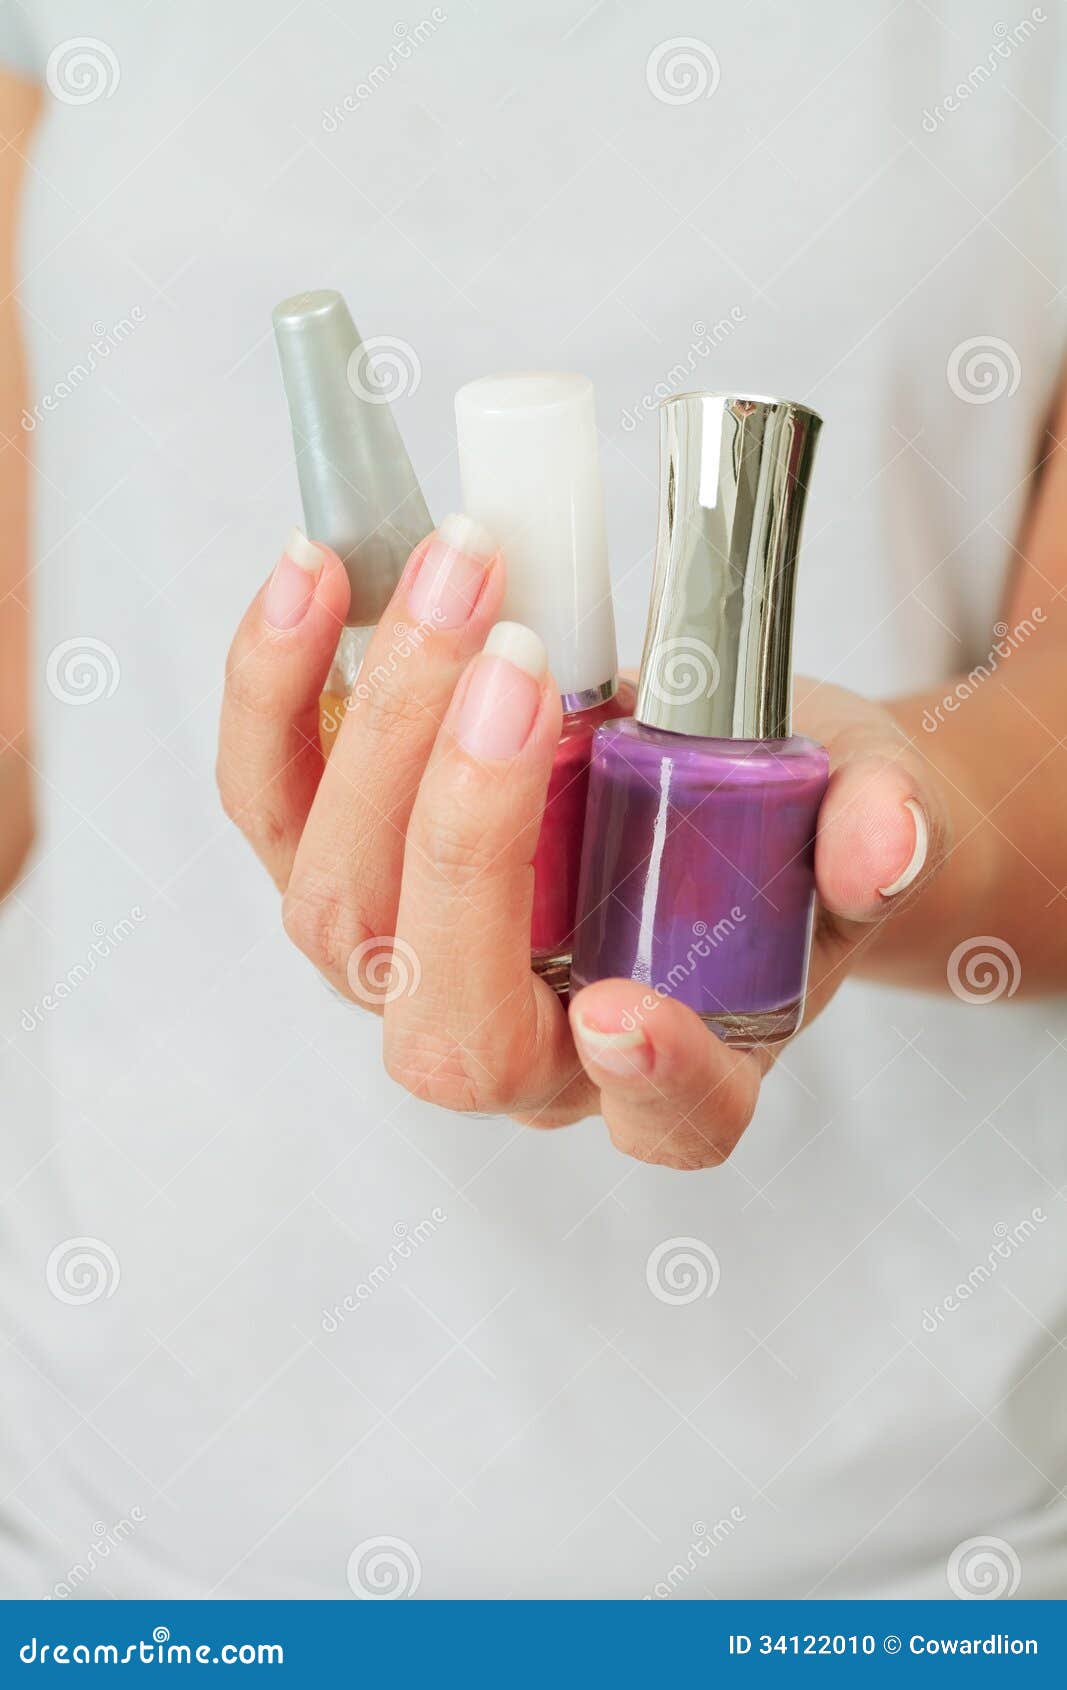 female hand with nail varnish bottles